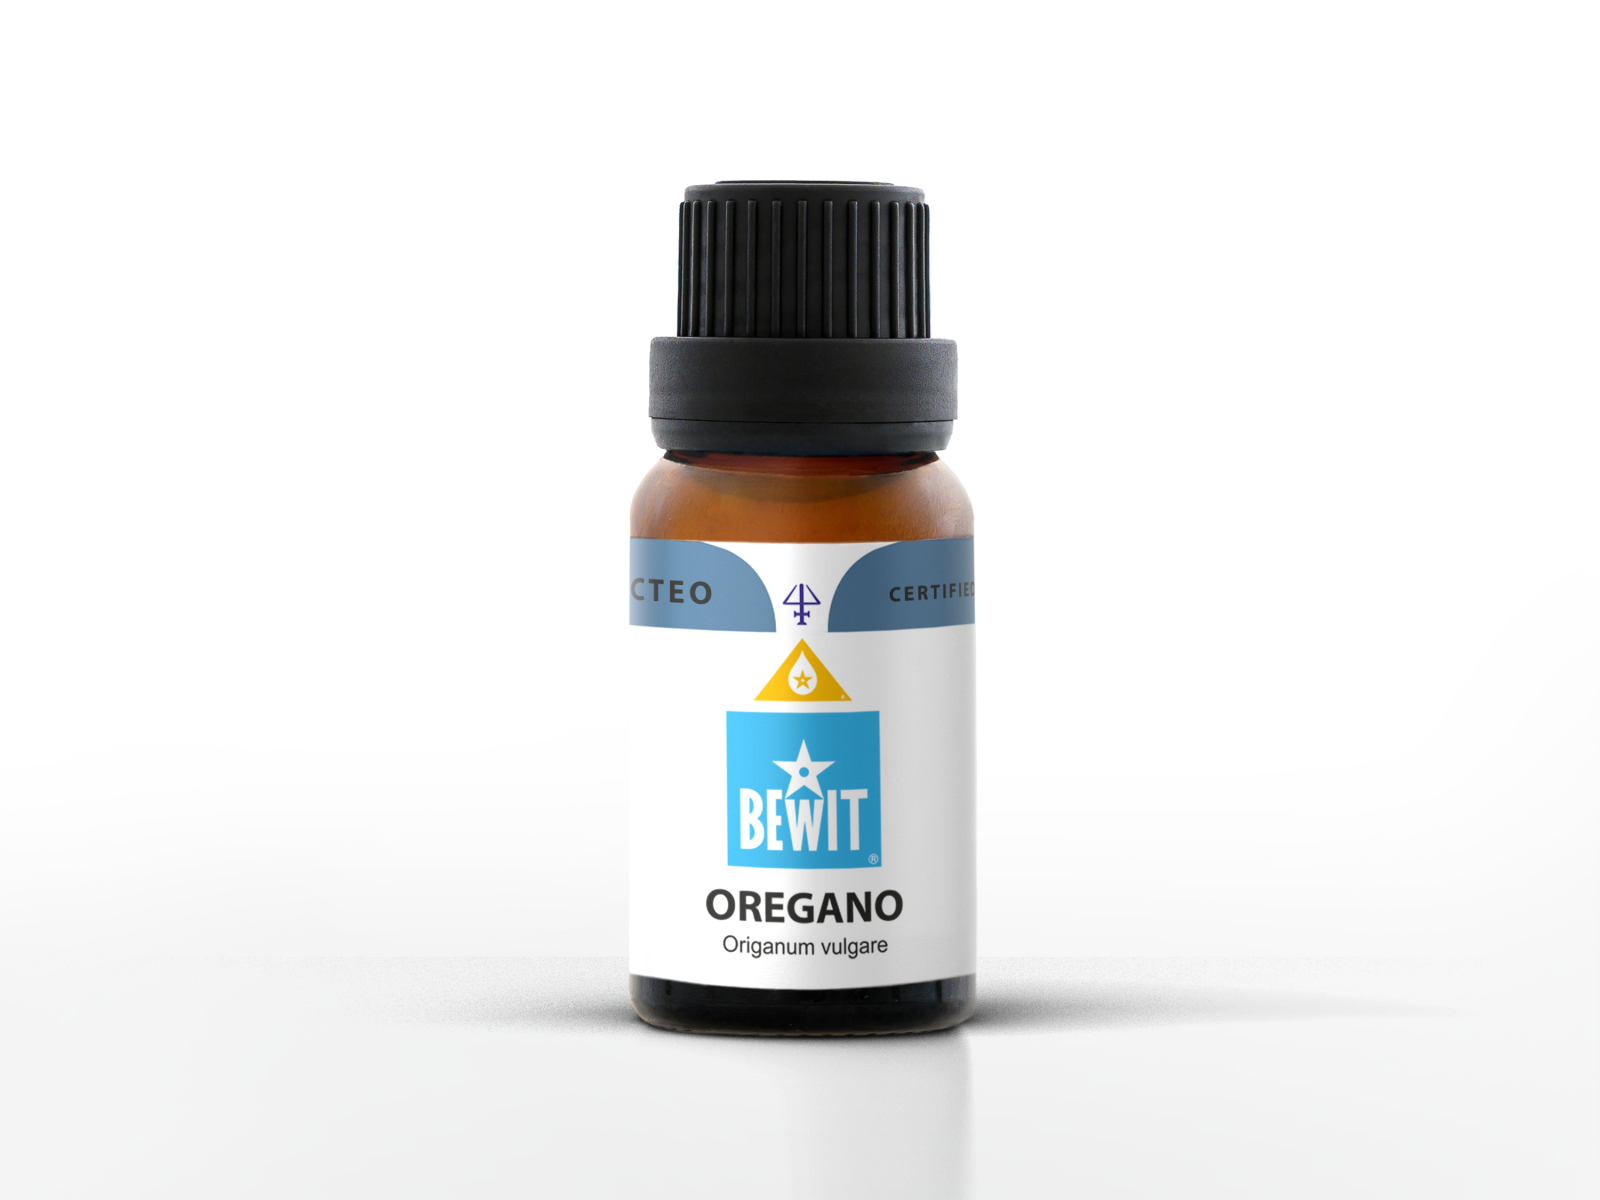 BEWIT Oregano - It is a 100% pure essential oil - 3